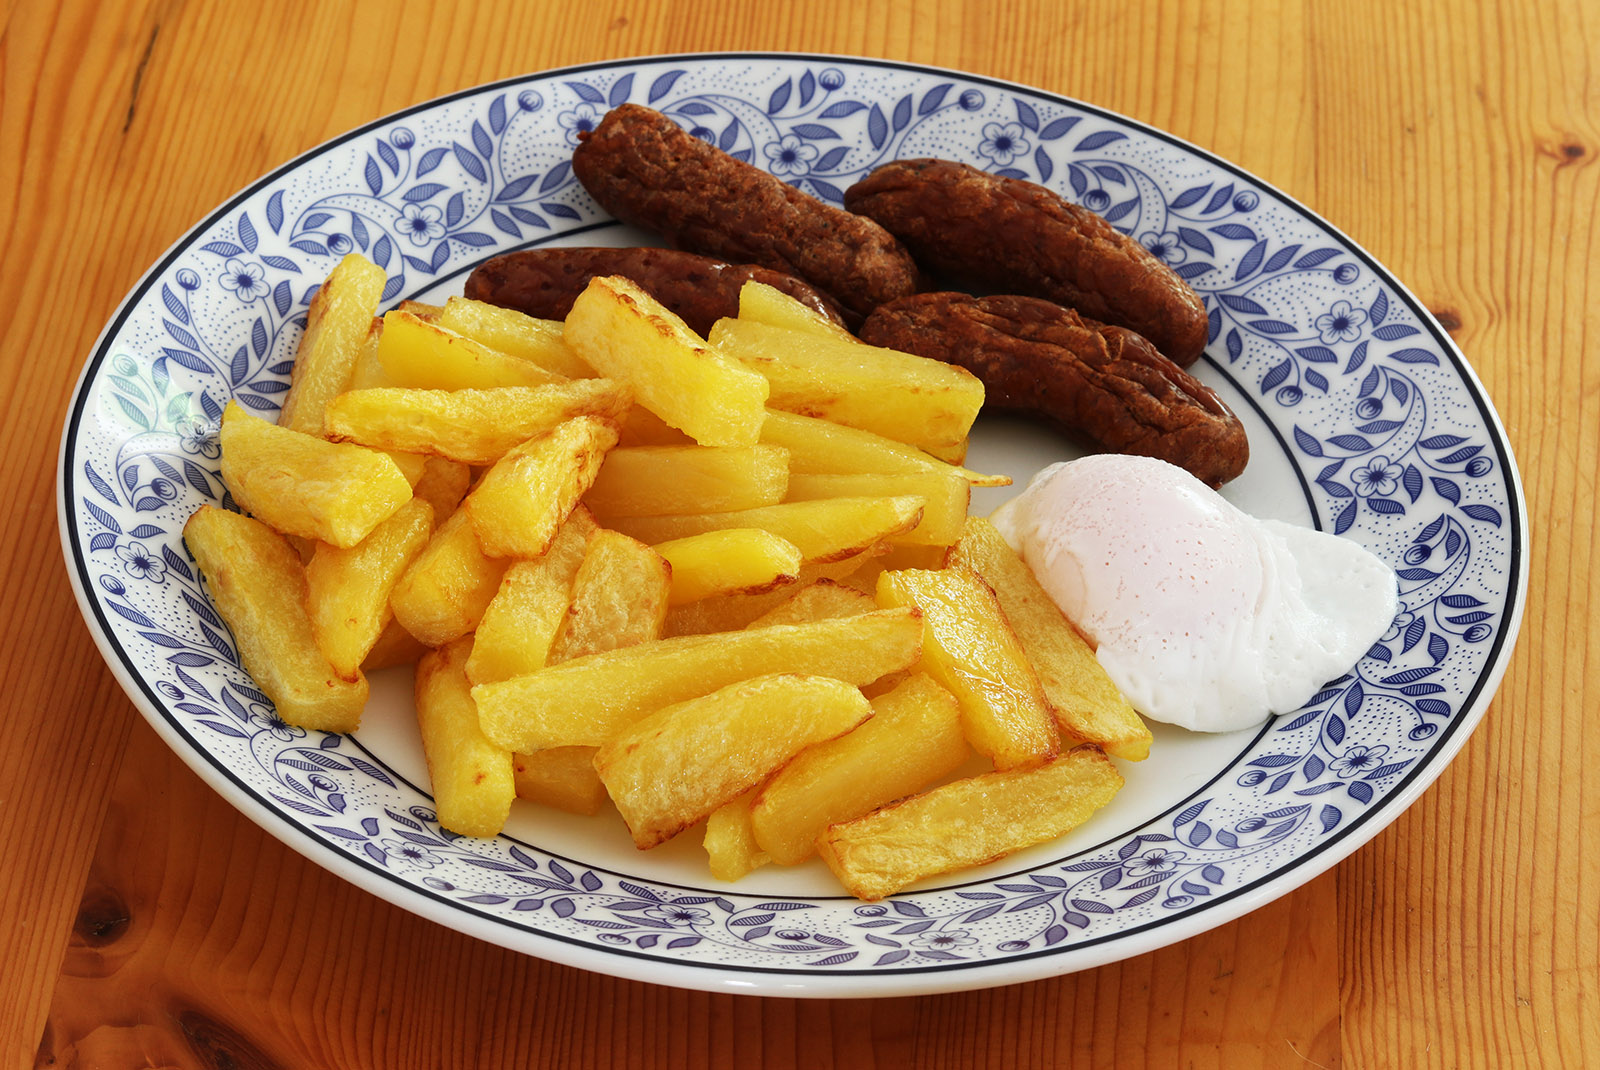 with eggs and chips 0 s.jpg